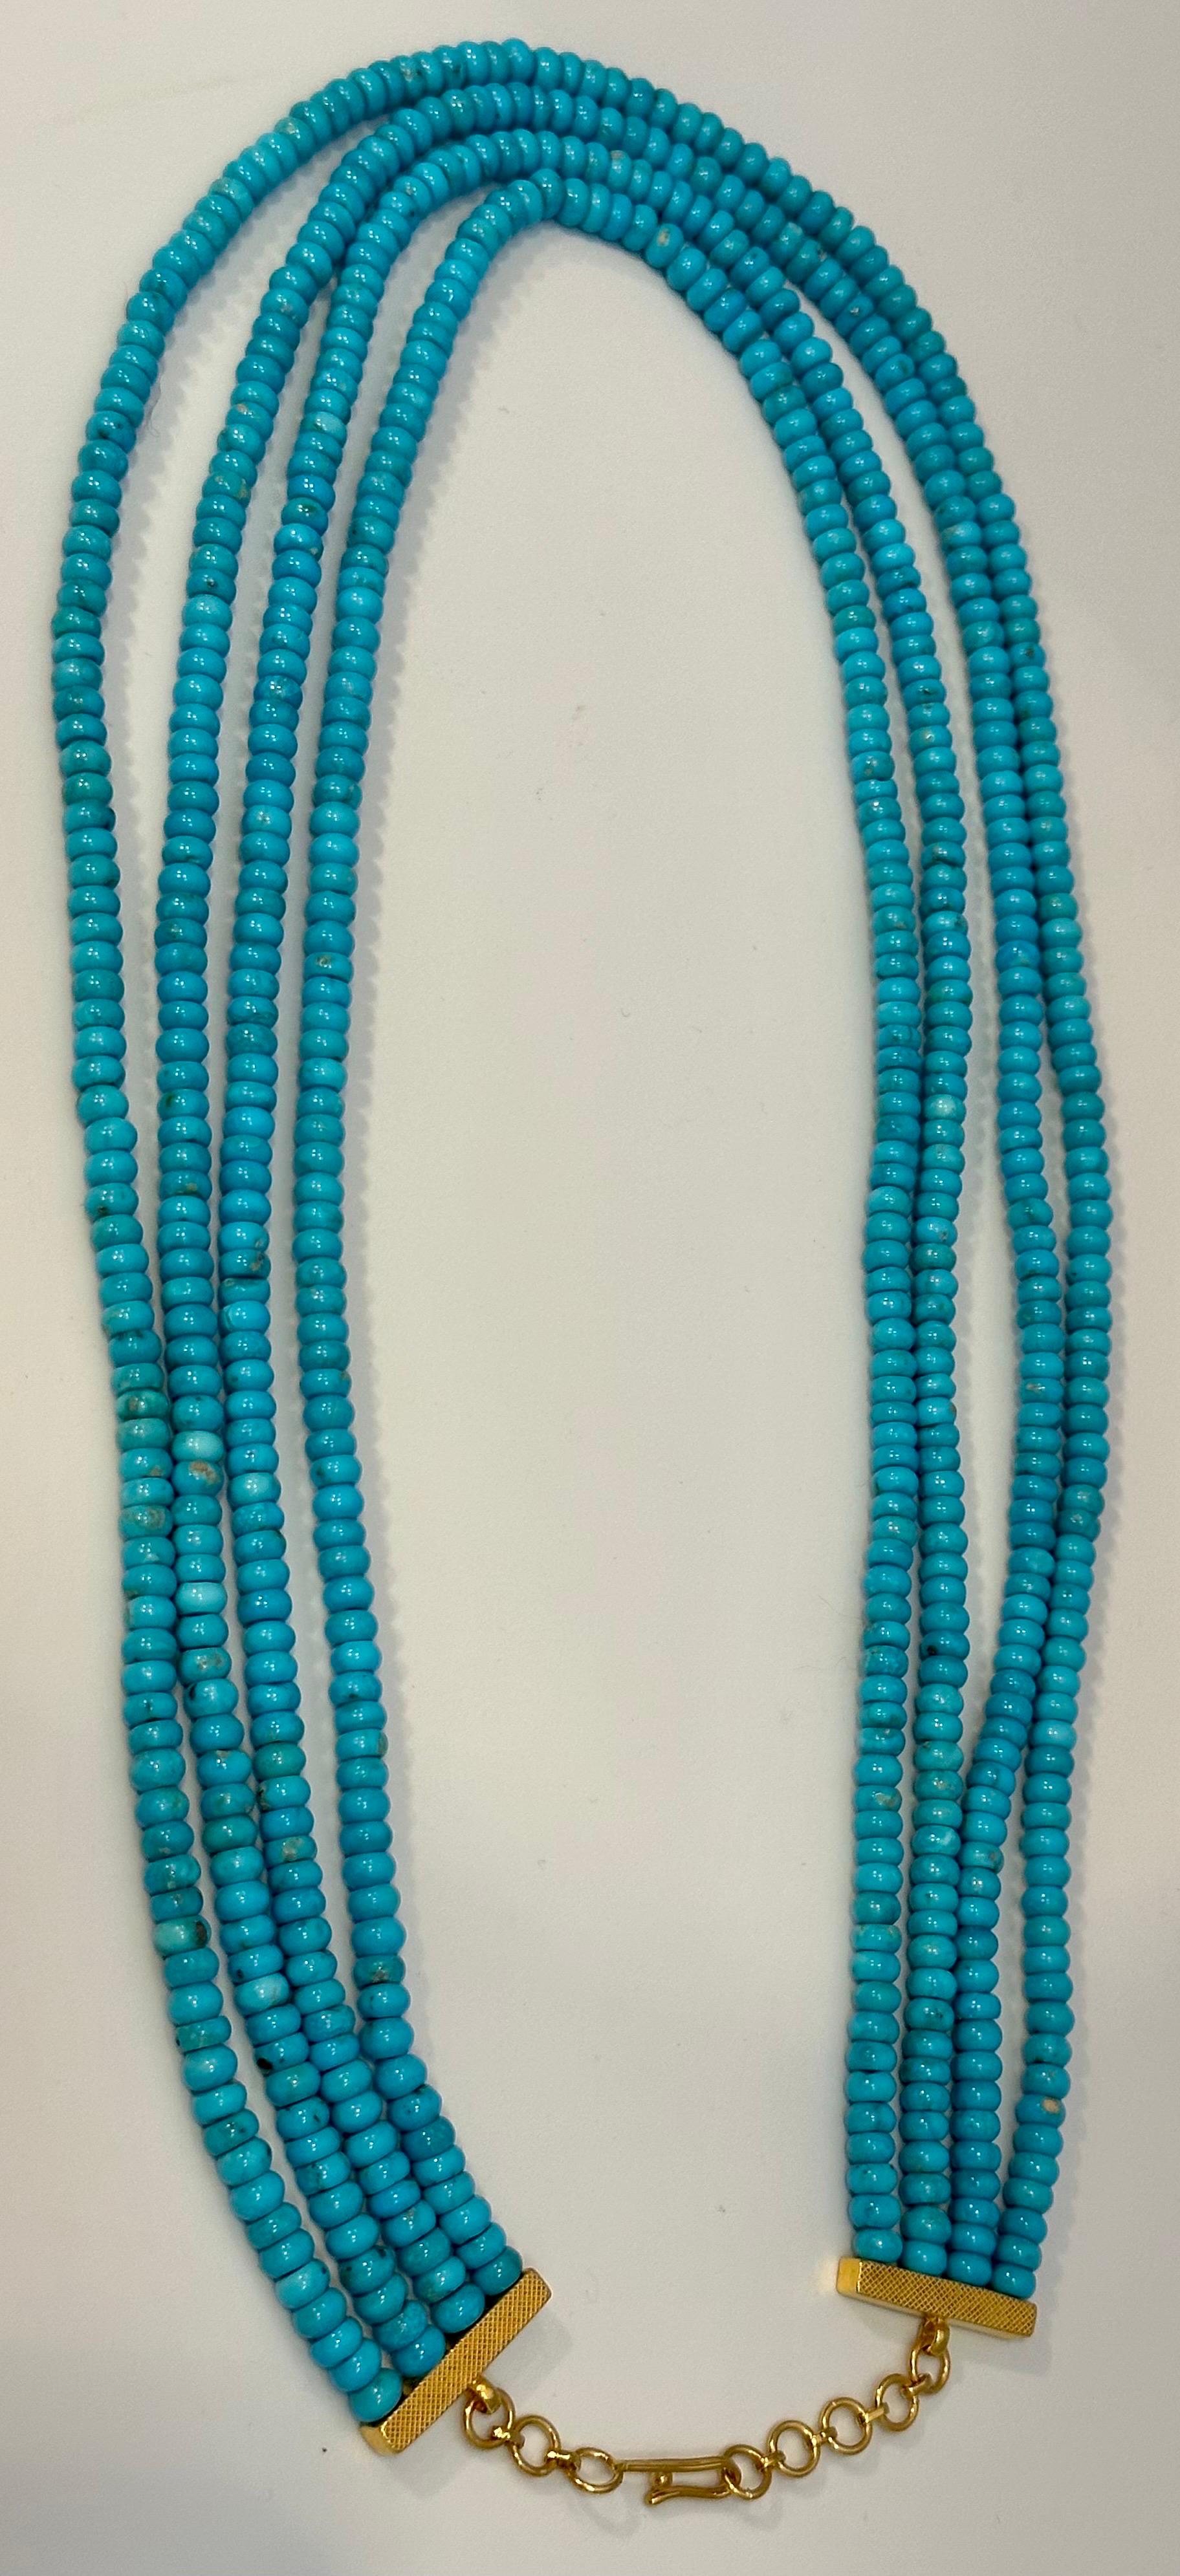 500 Carat Natural Sleeping Beauty Turquoise Necklace, Four Strand 14 Karat Gold In Excellent Condition For Sale In New York, NY